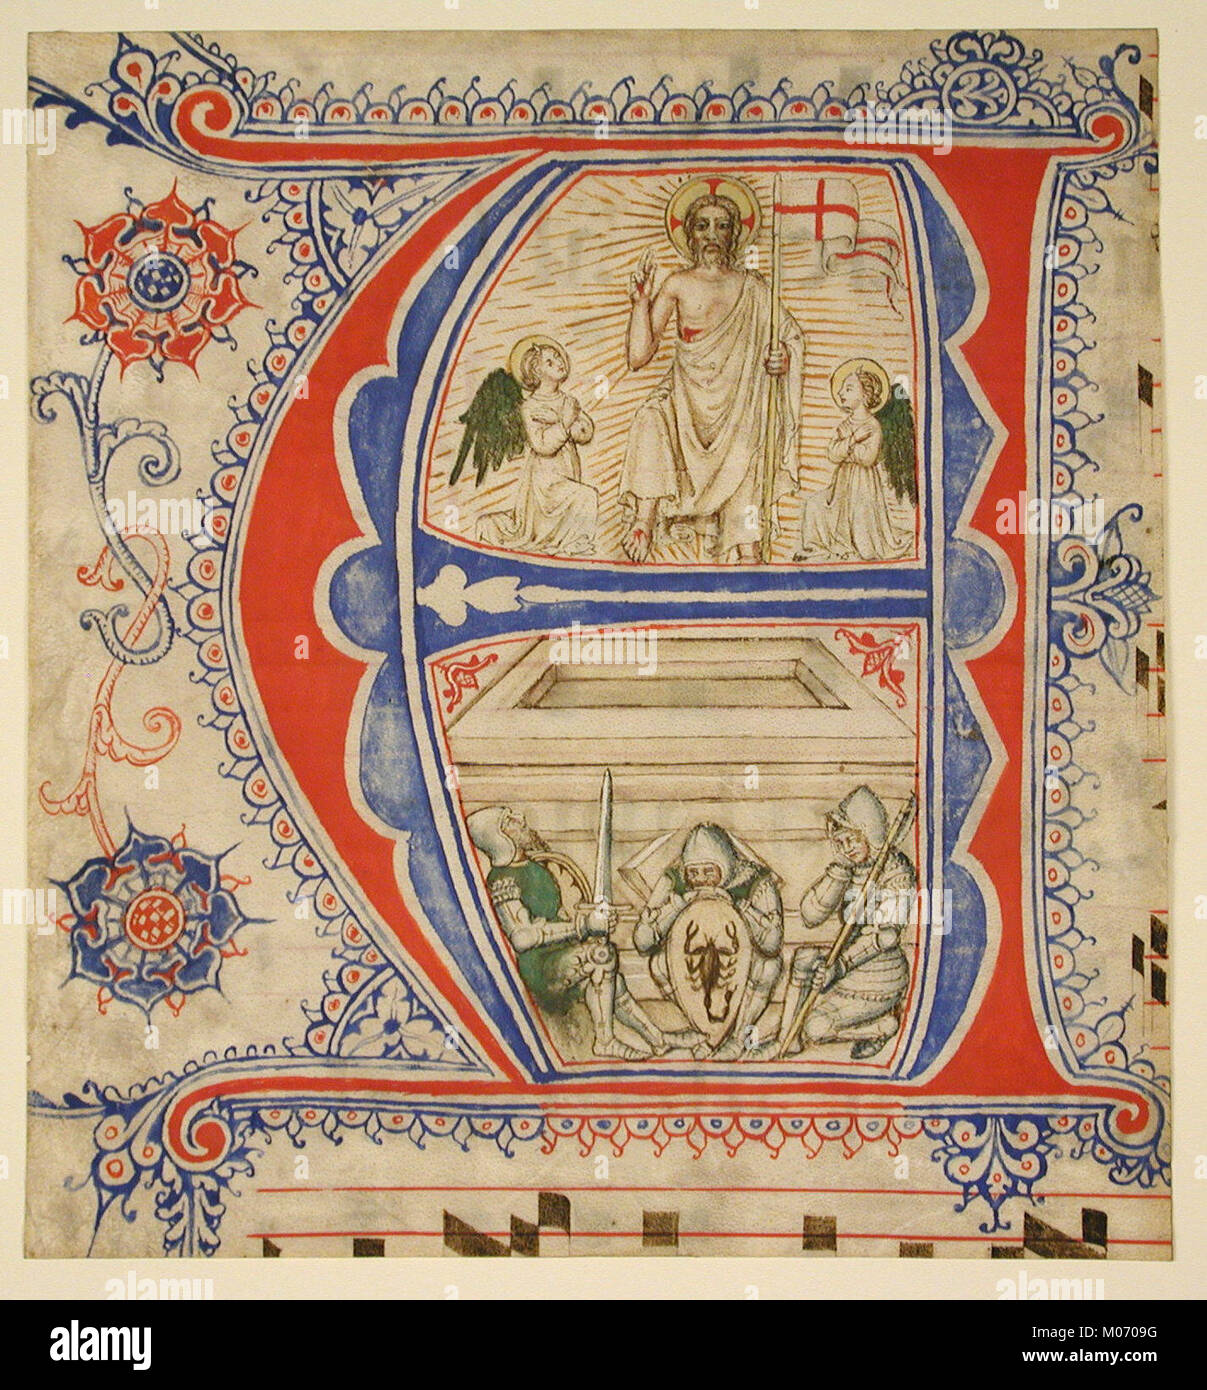 Manuscript Leaf Showing an Illuminated Initial A and The Resurrection MET tem2321-5 Stock Photo